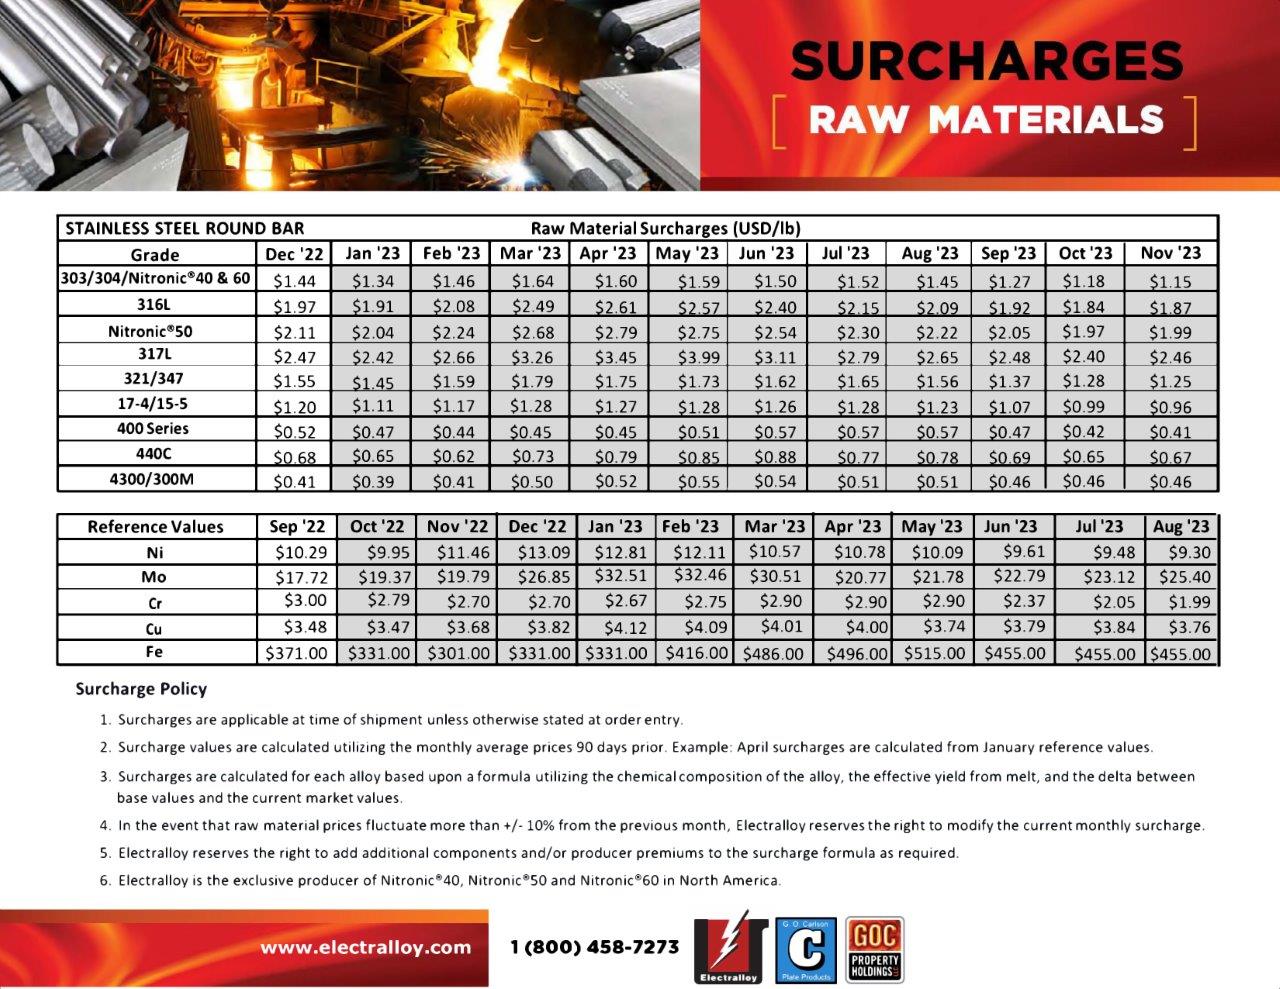 SURCHARGES STAINLESS STEEL ROUND BAR